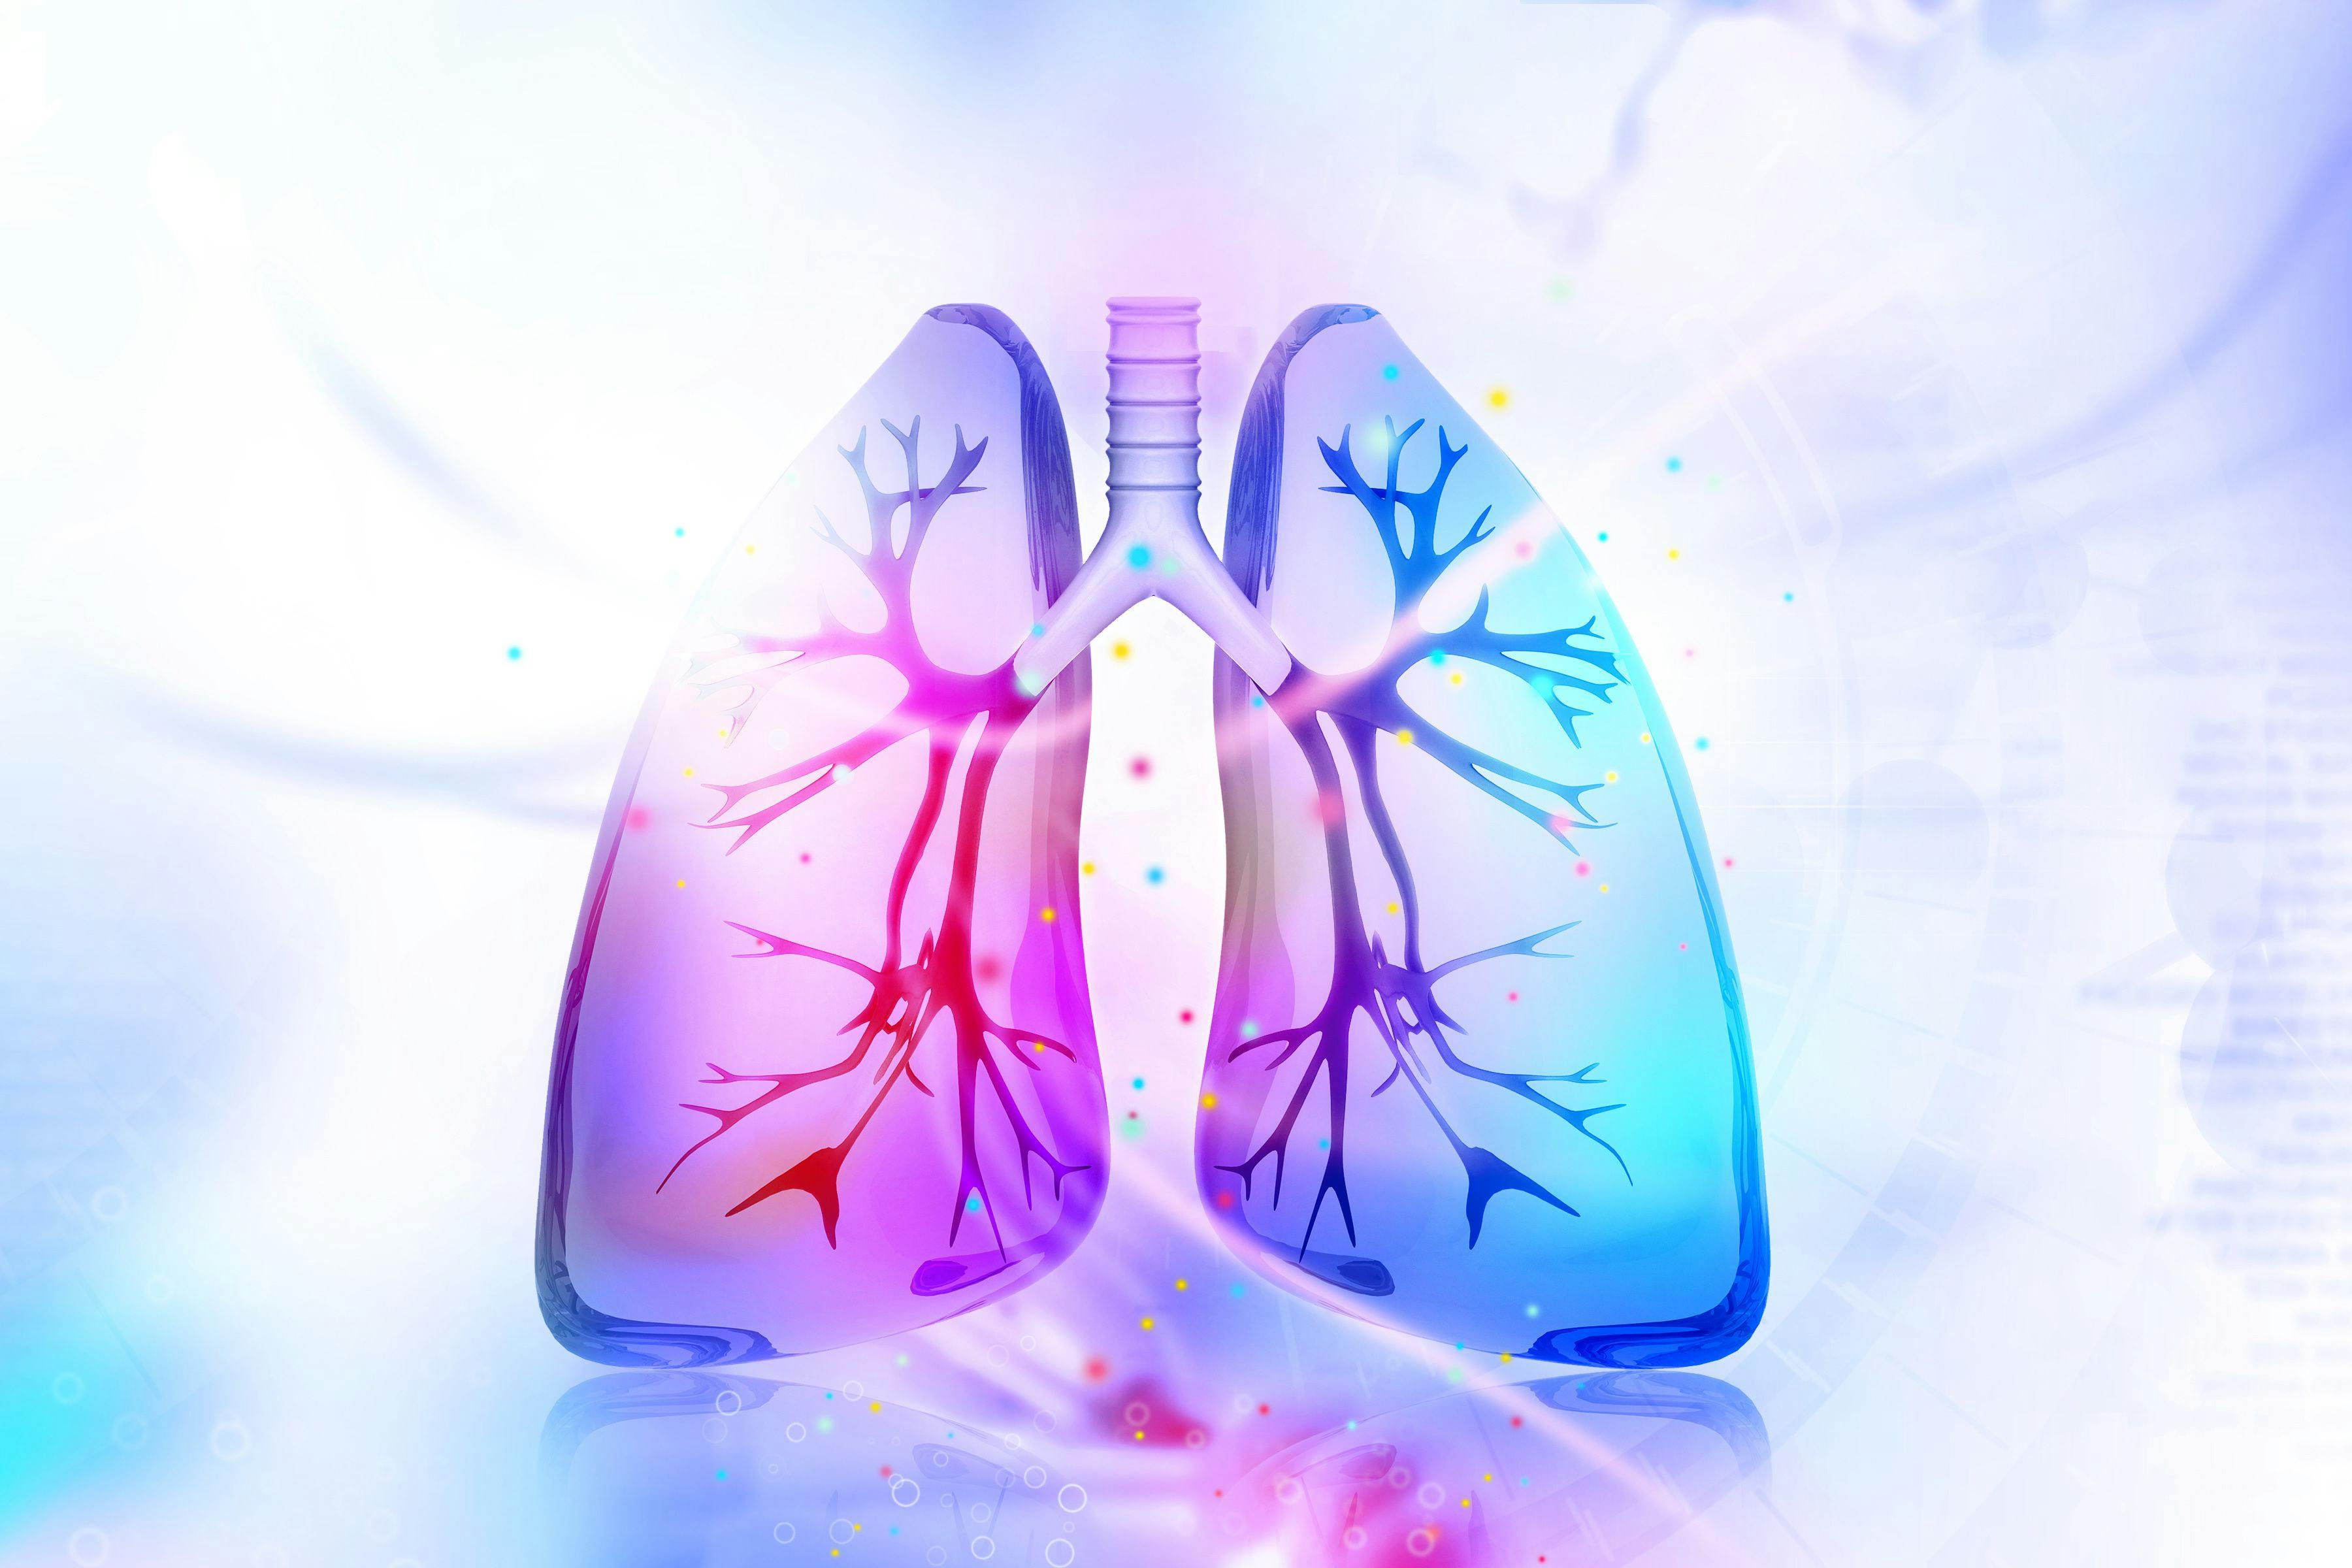 How Lung Macrophages Develop May Have Role in Disease, Study Says